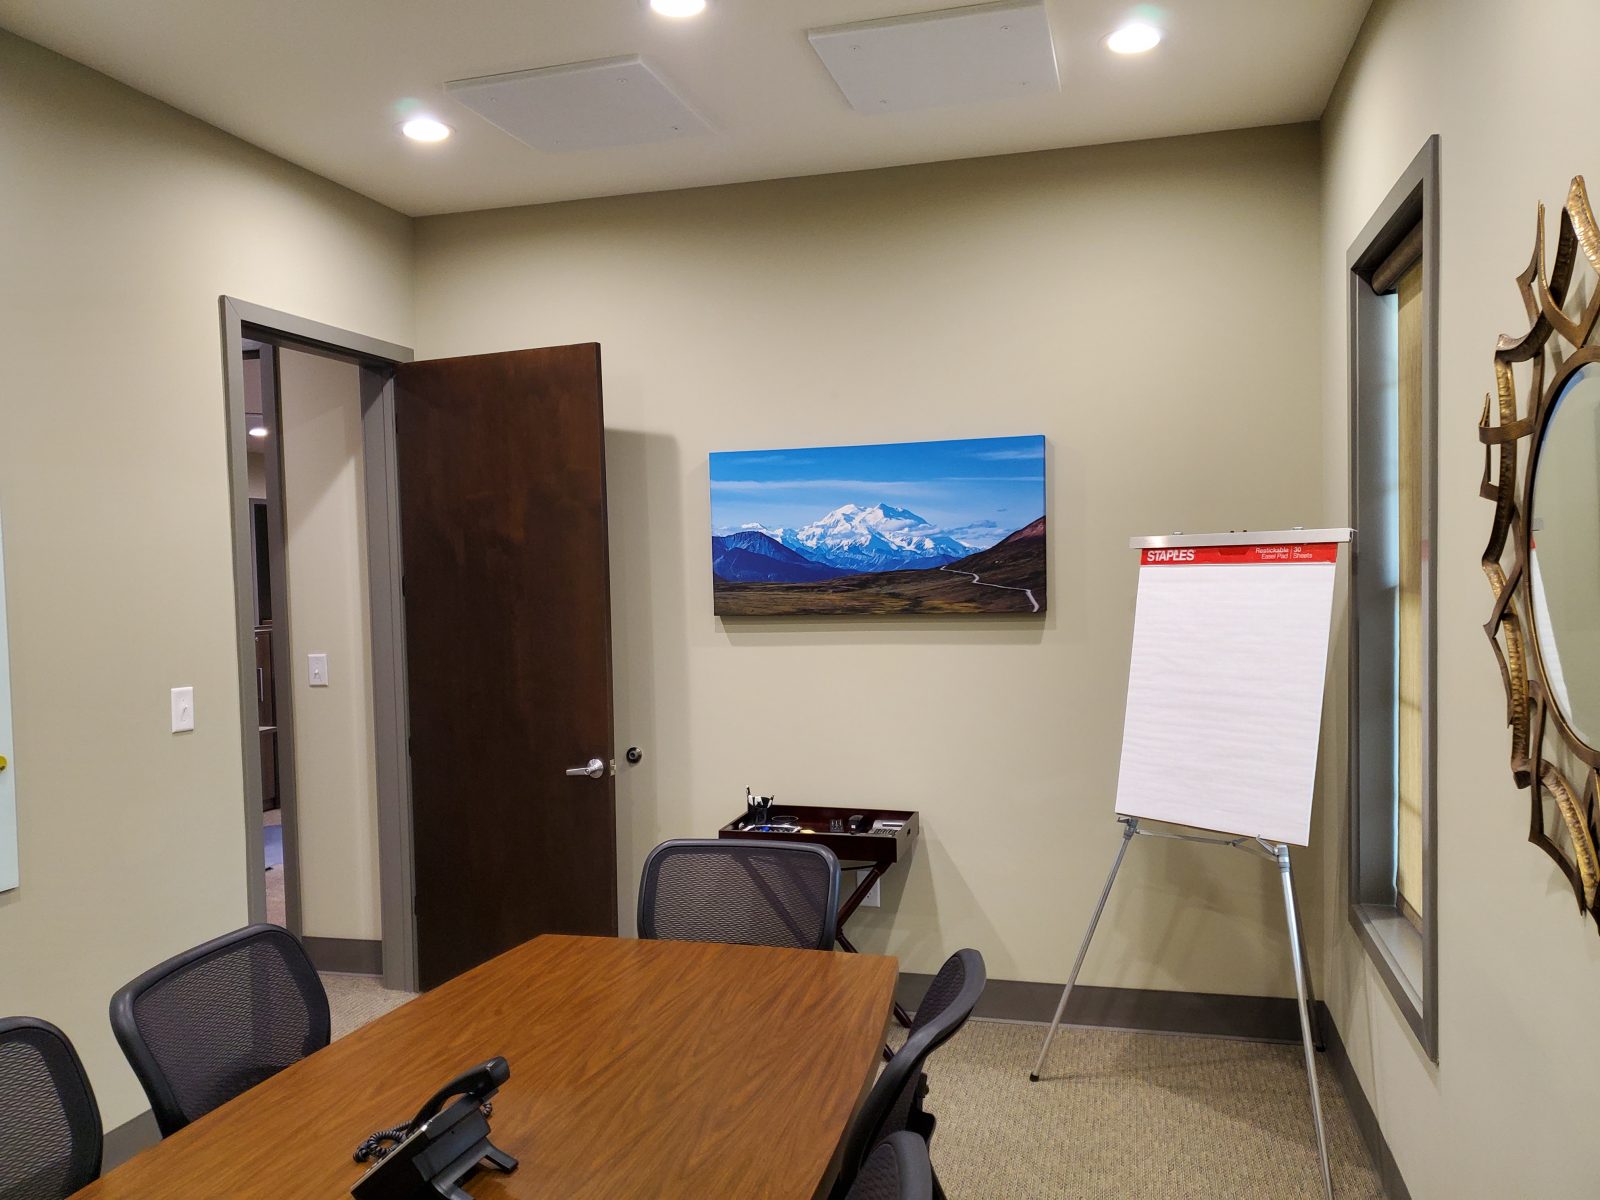 Acoustic Art Panels in office with landscape image of an epic mountain